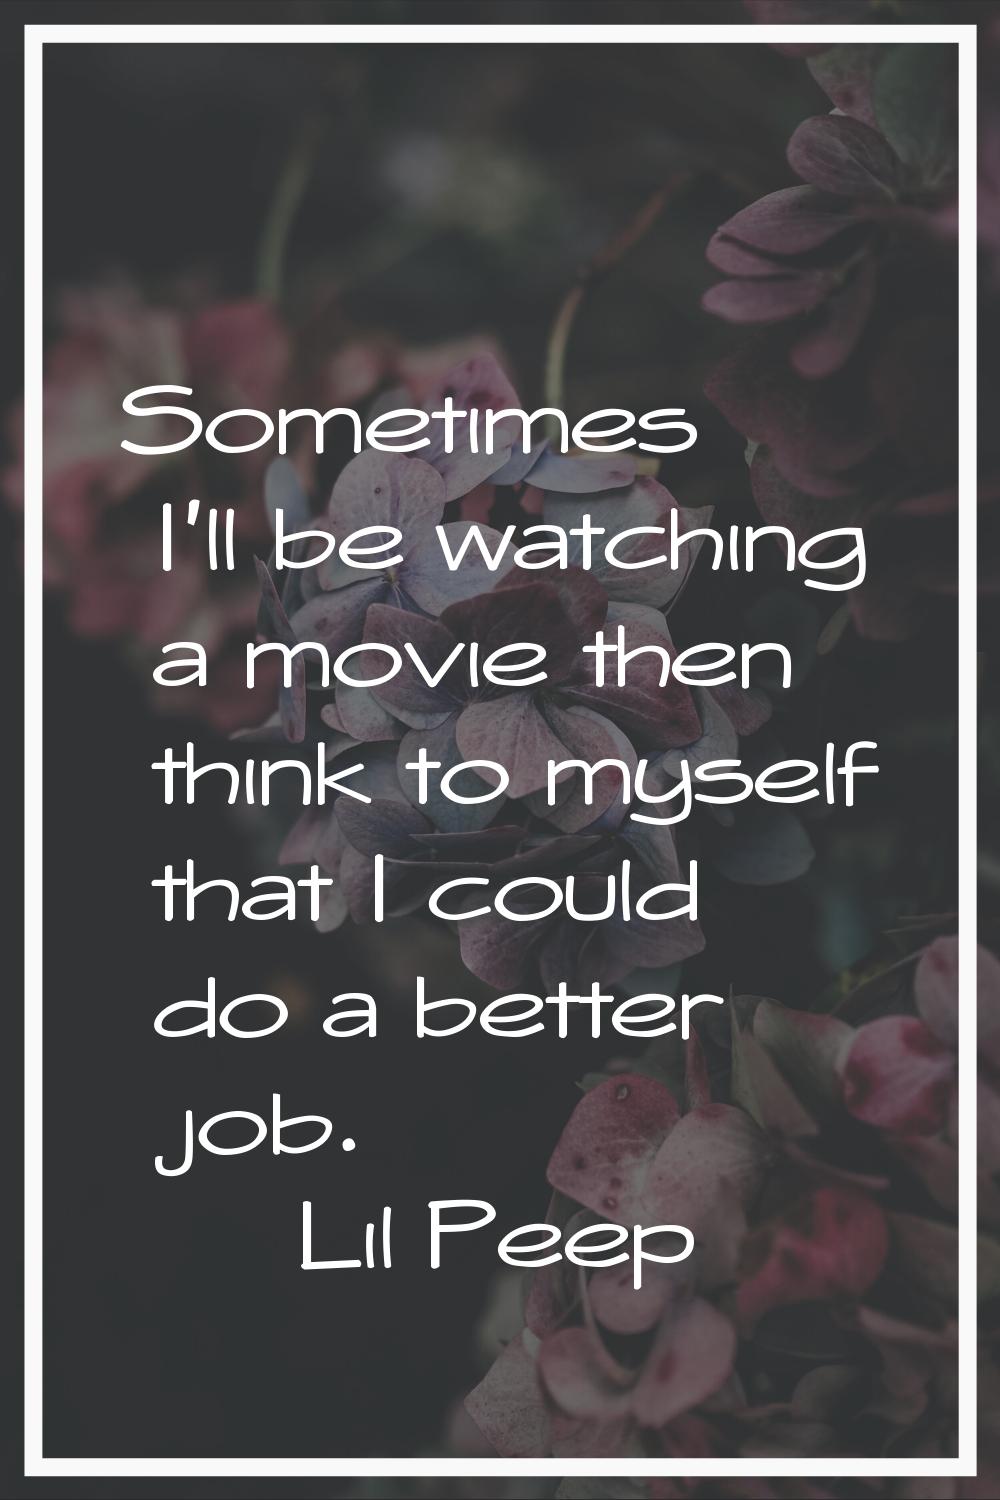 Sometimes I'll be watching a movie then think to myself that I could do a better job.